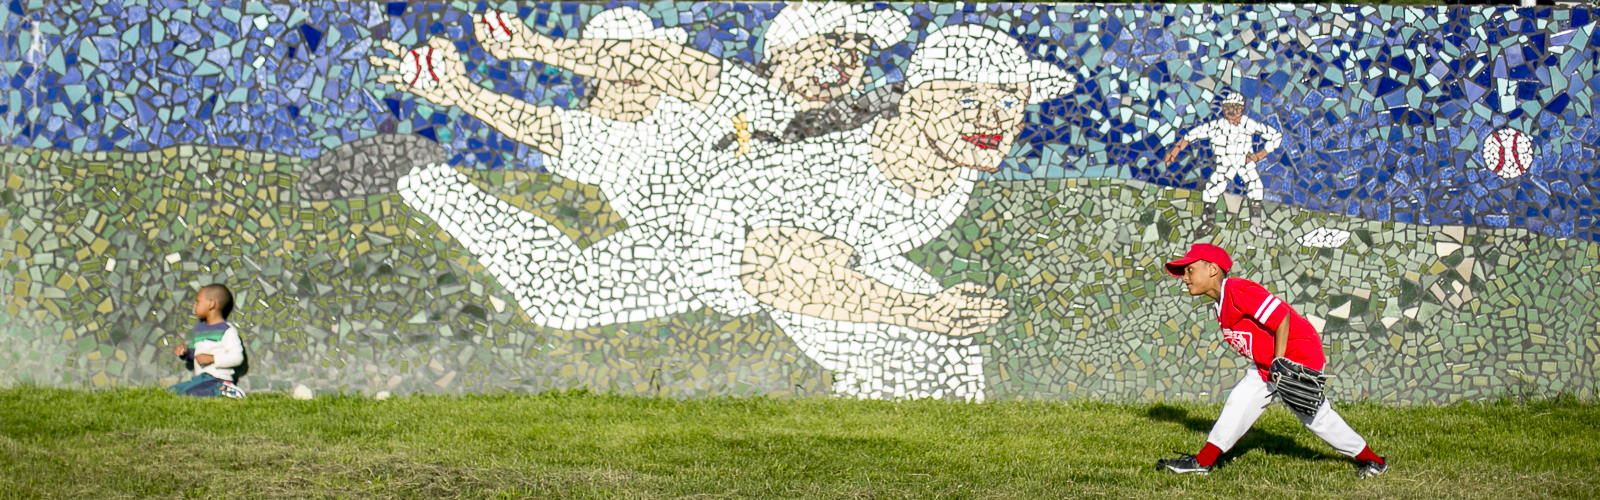 A child plays with a ball in front of a mosaic by artist Hubert Massey